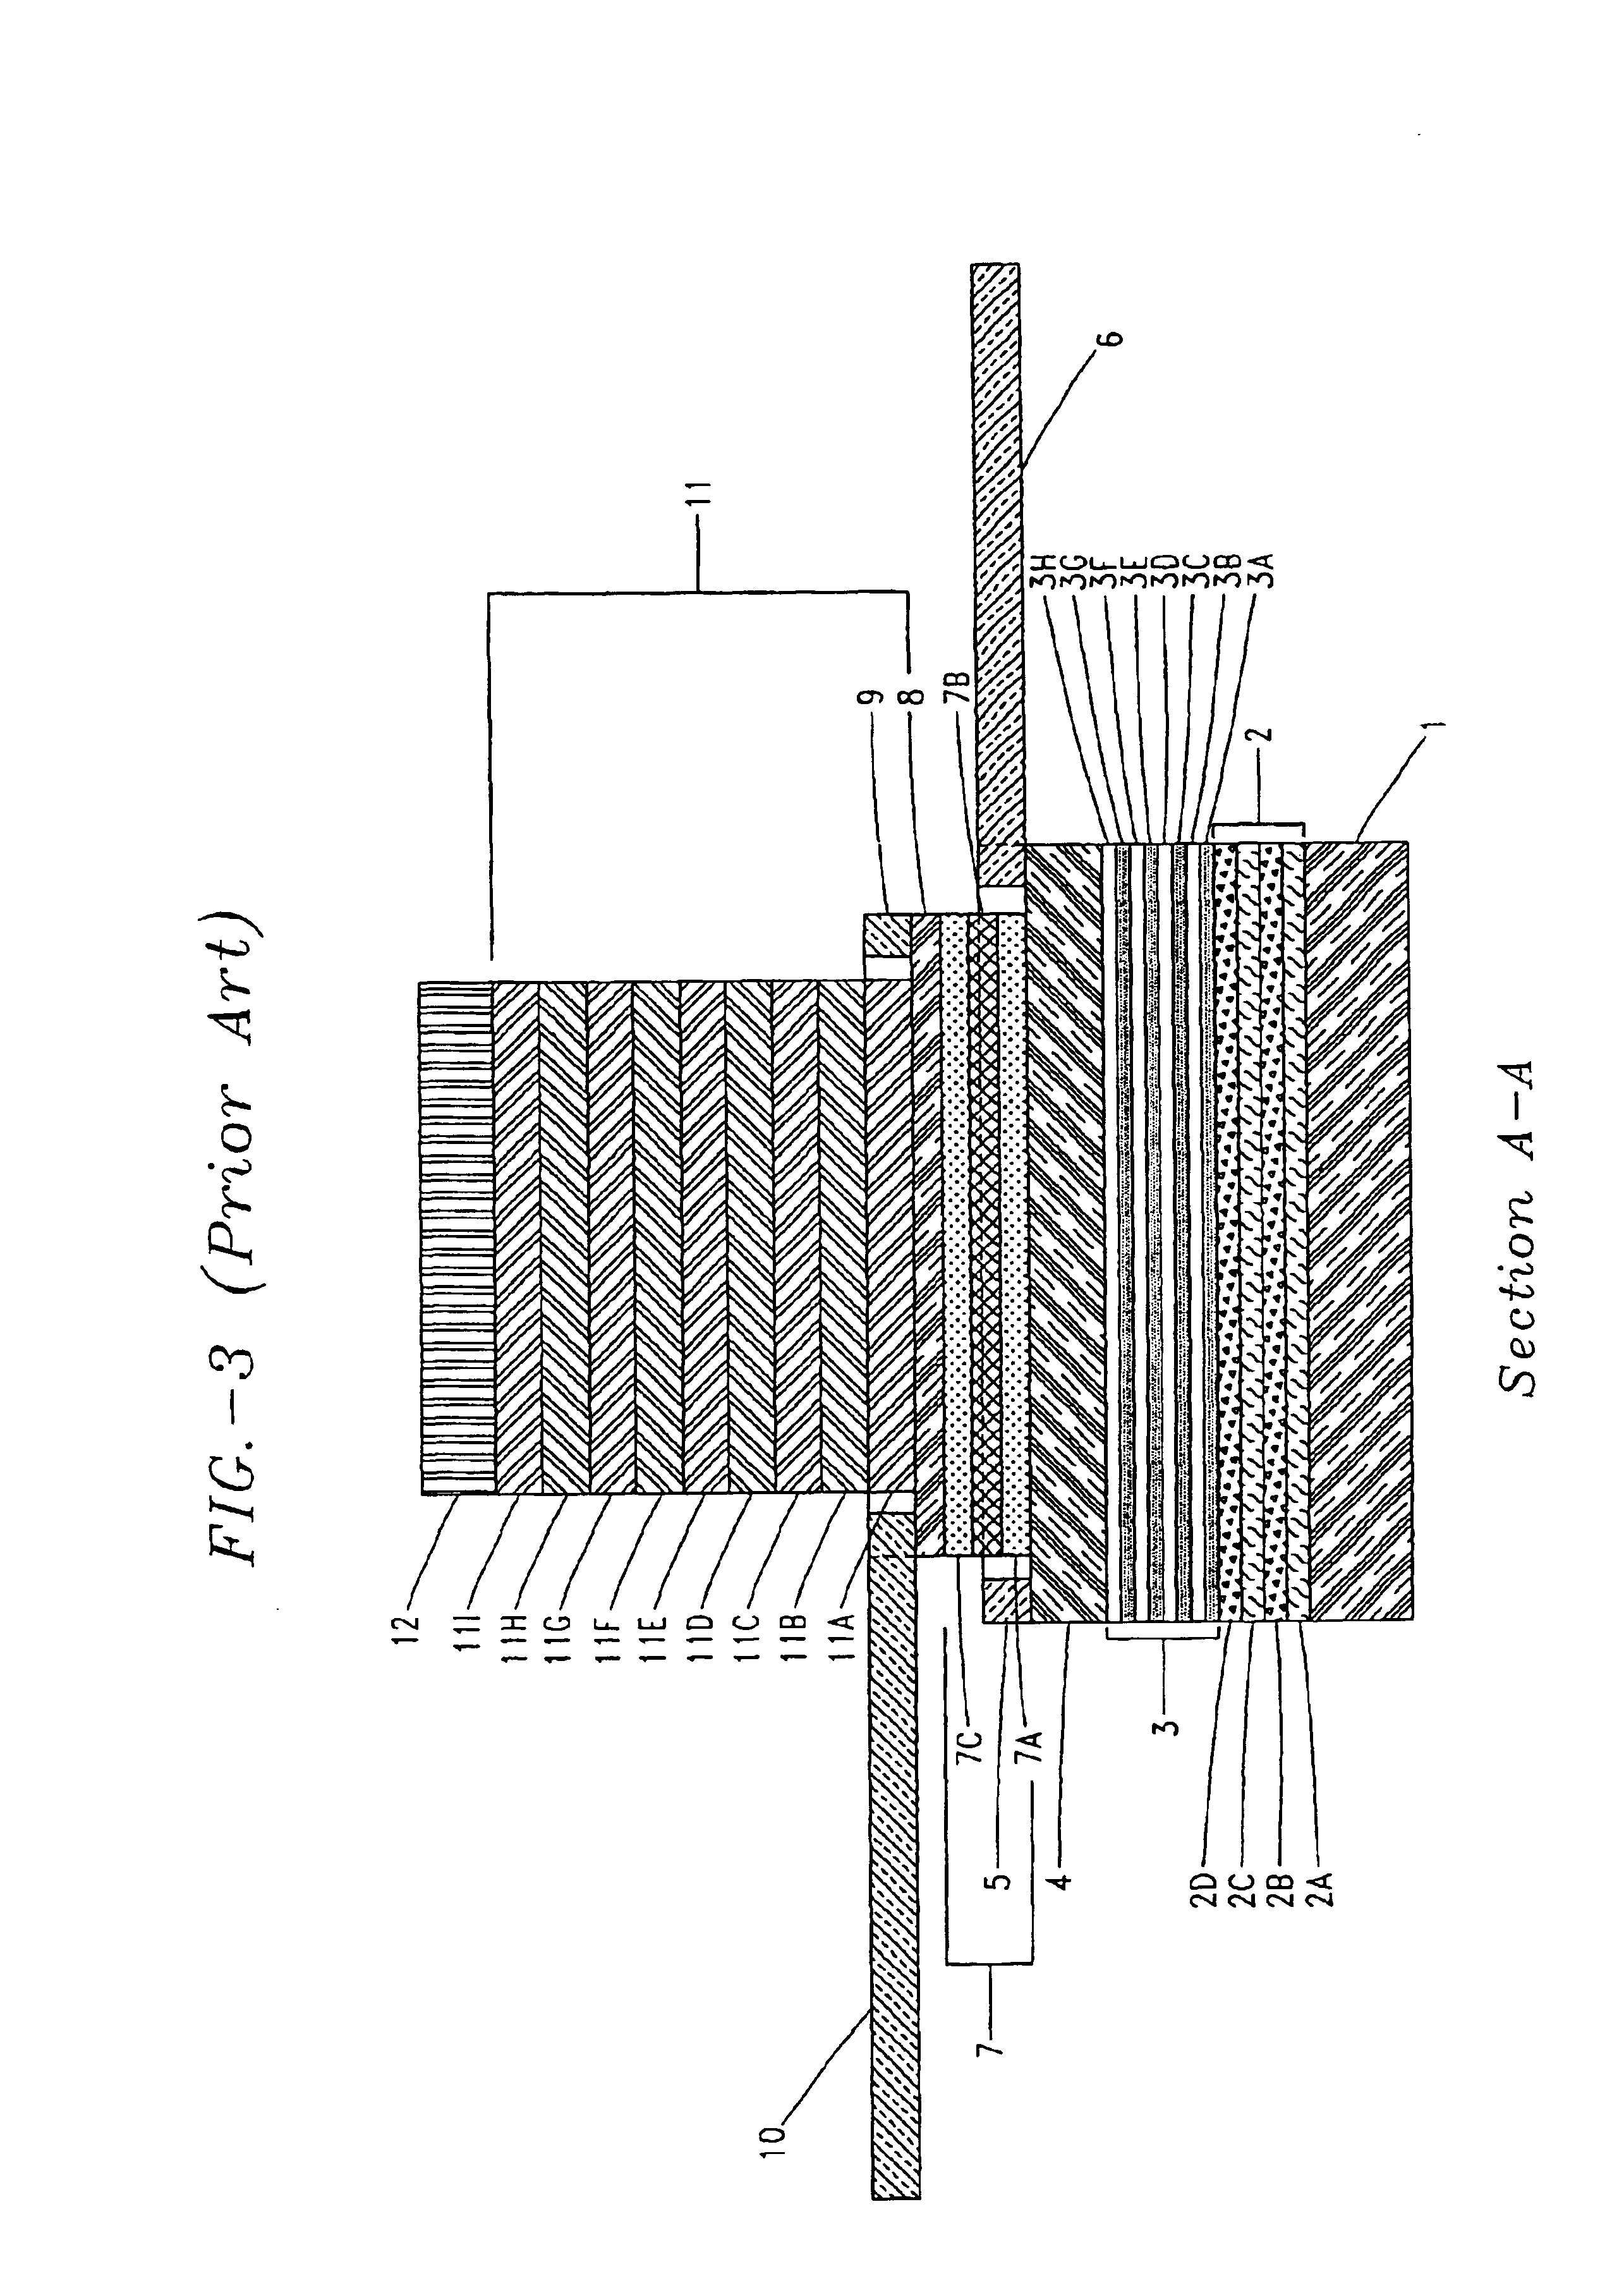 Vertical cavity surface emitting laser that uses intracavity degenerate four-wave mixing to produce phase-conjugated and distortion free collimated laser light